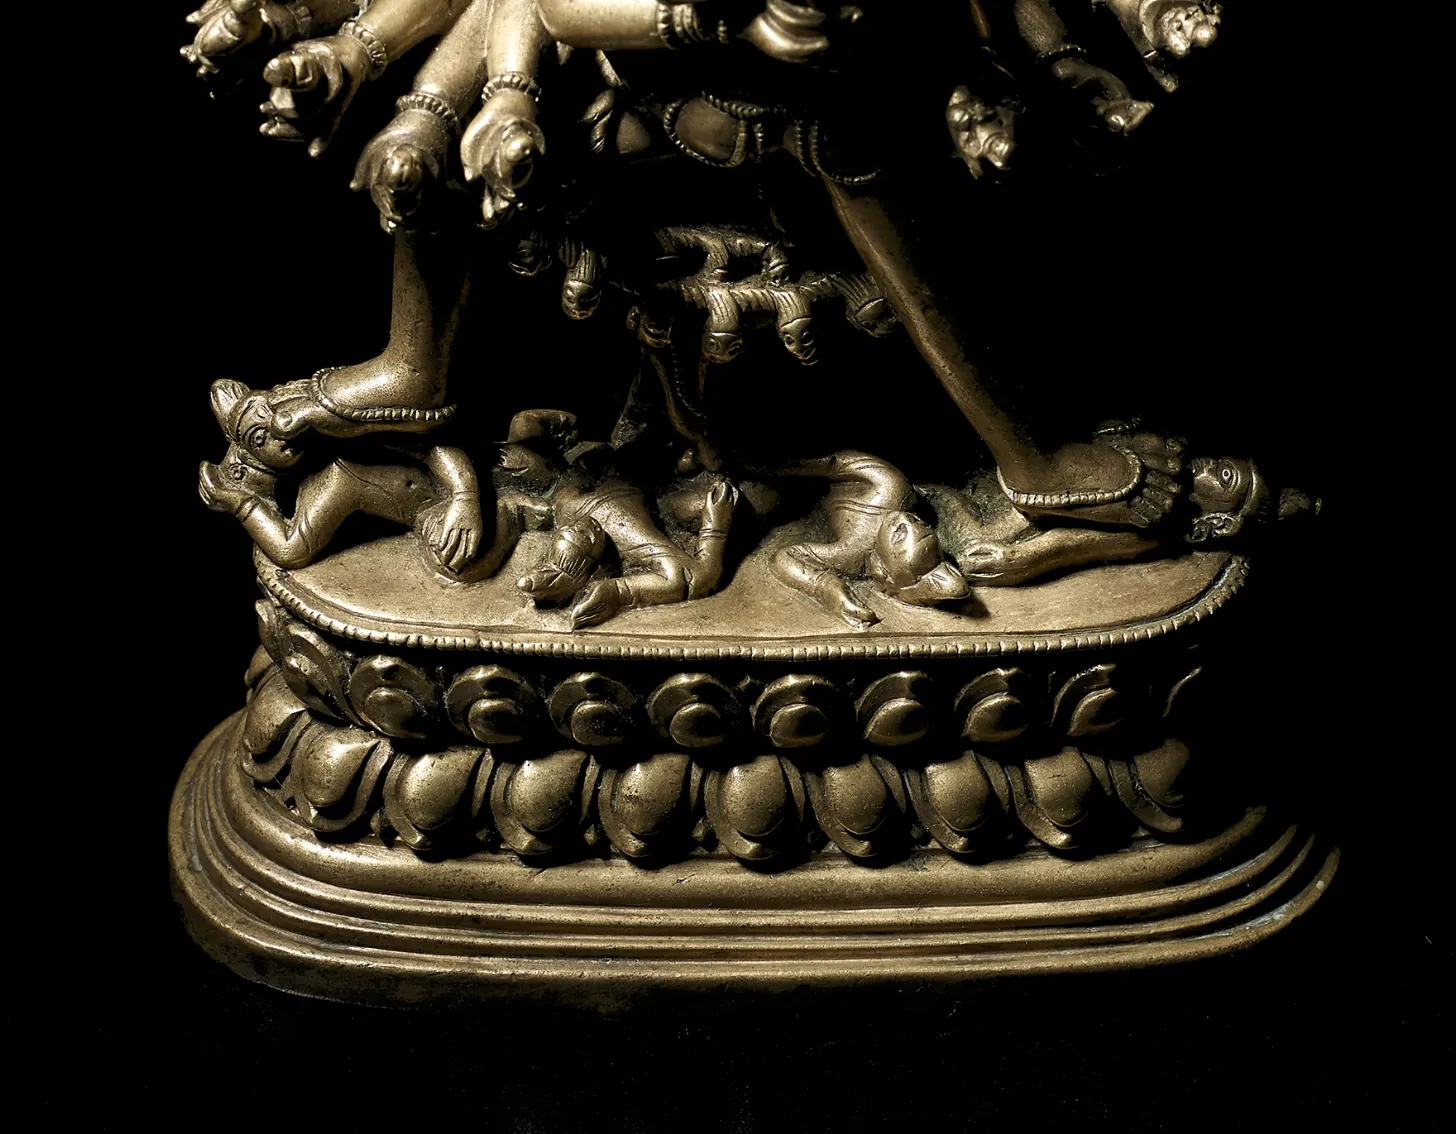 Close up look of : A brass alloy figure of Kapaladhara Hevajra